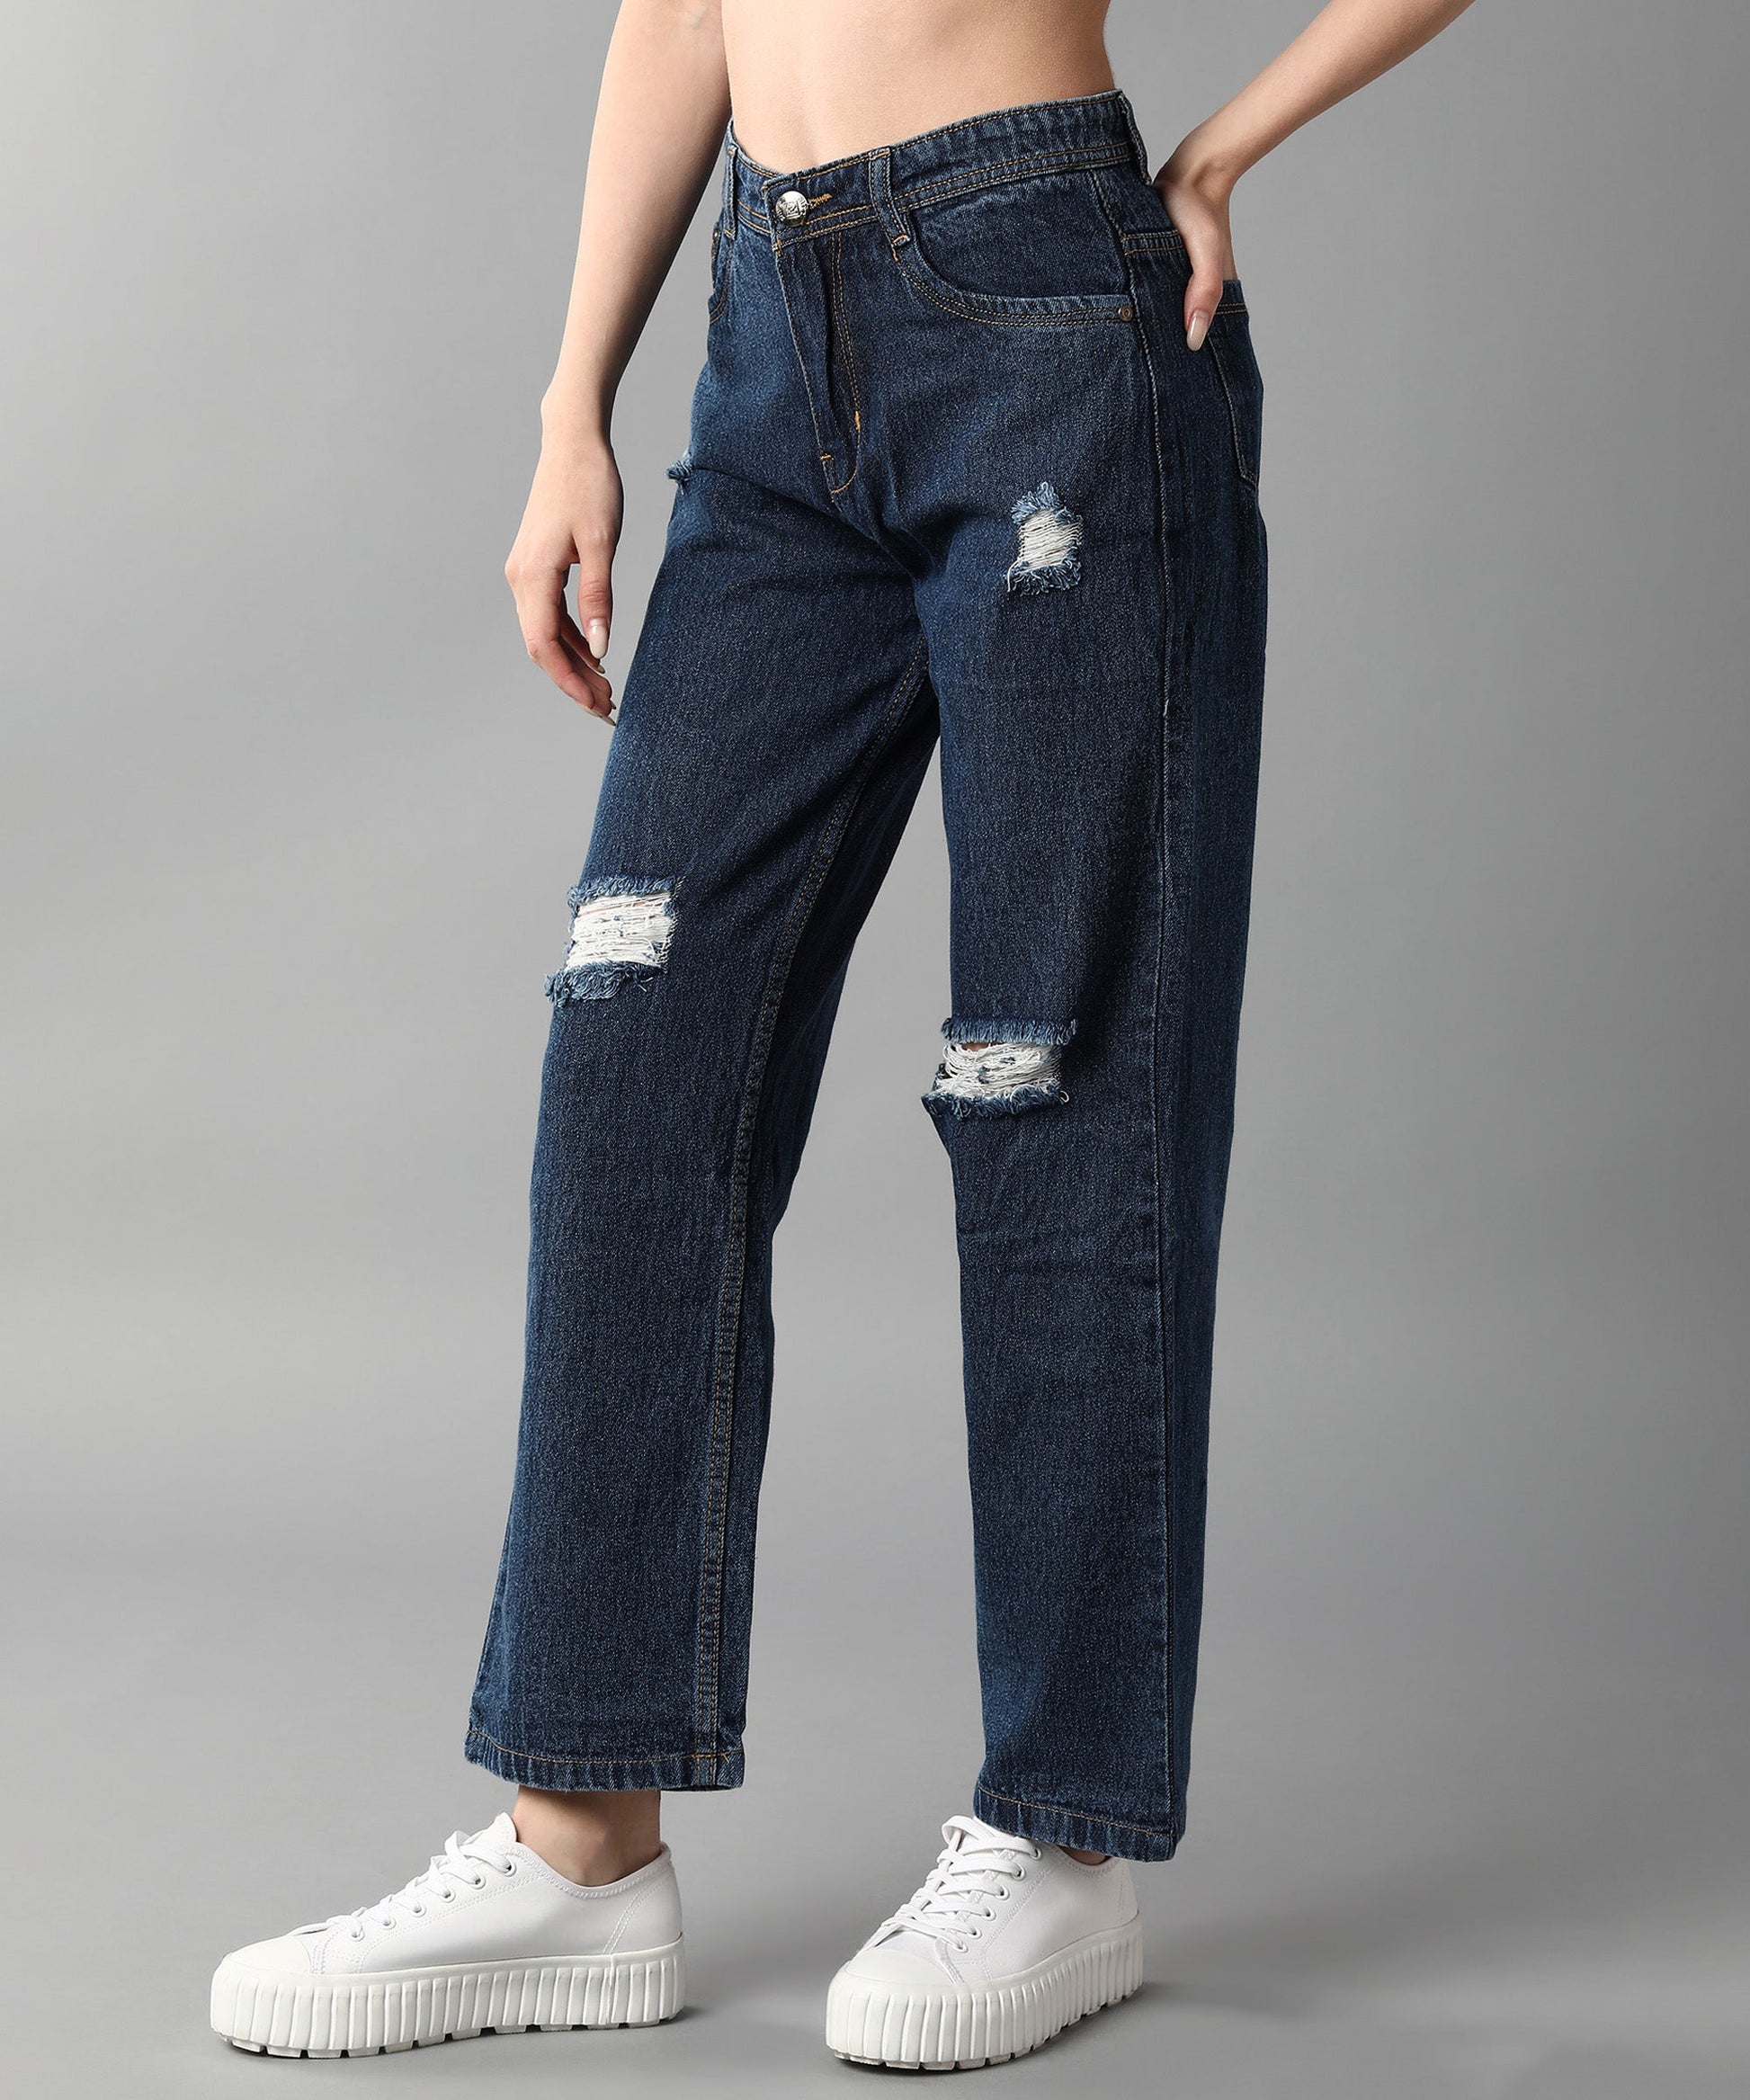 Relaxed Fit Distressed Blue Jeans - NiftyJeans